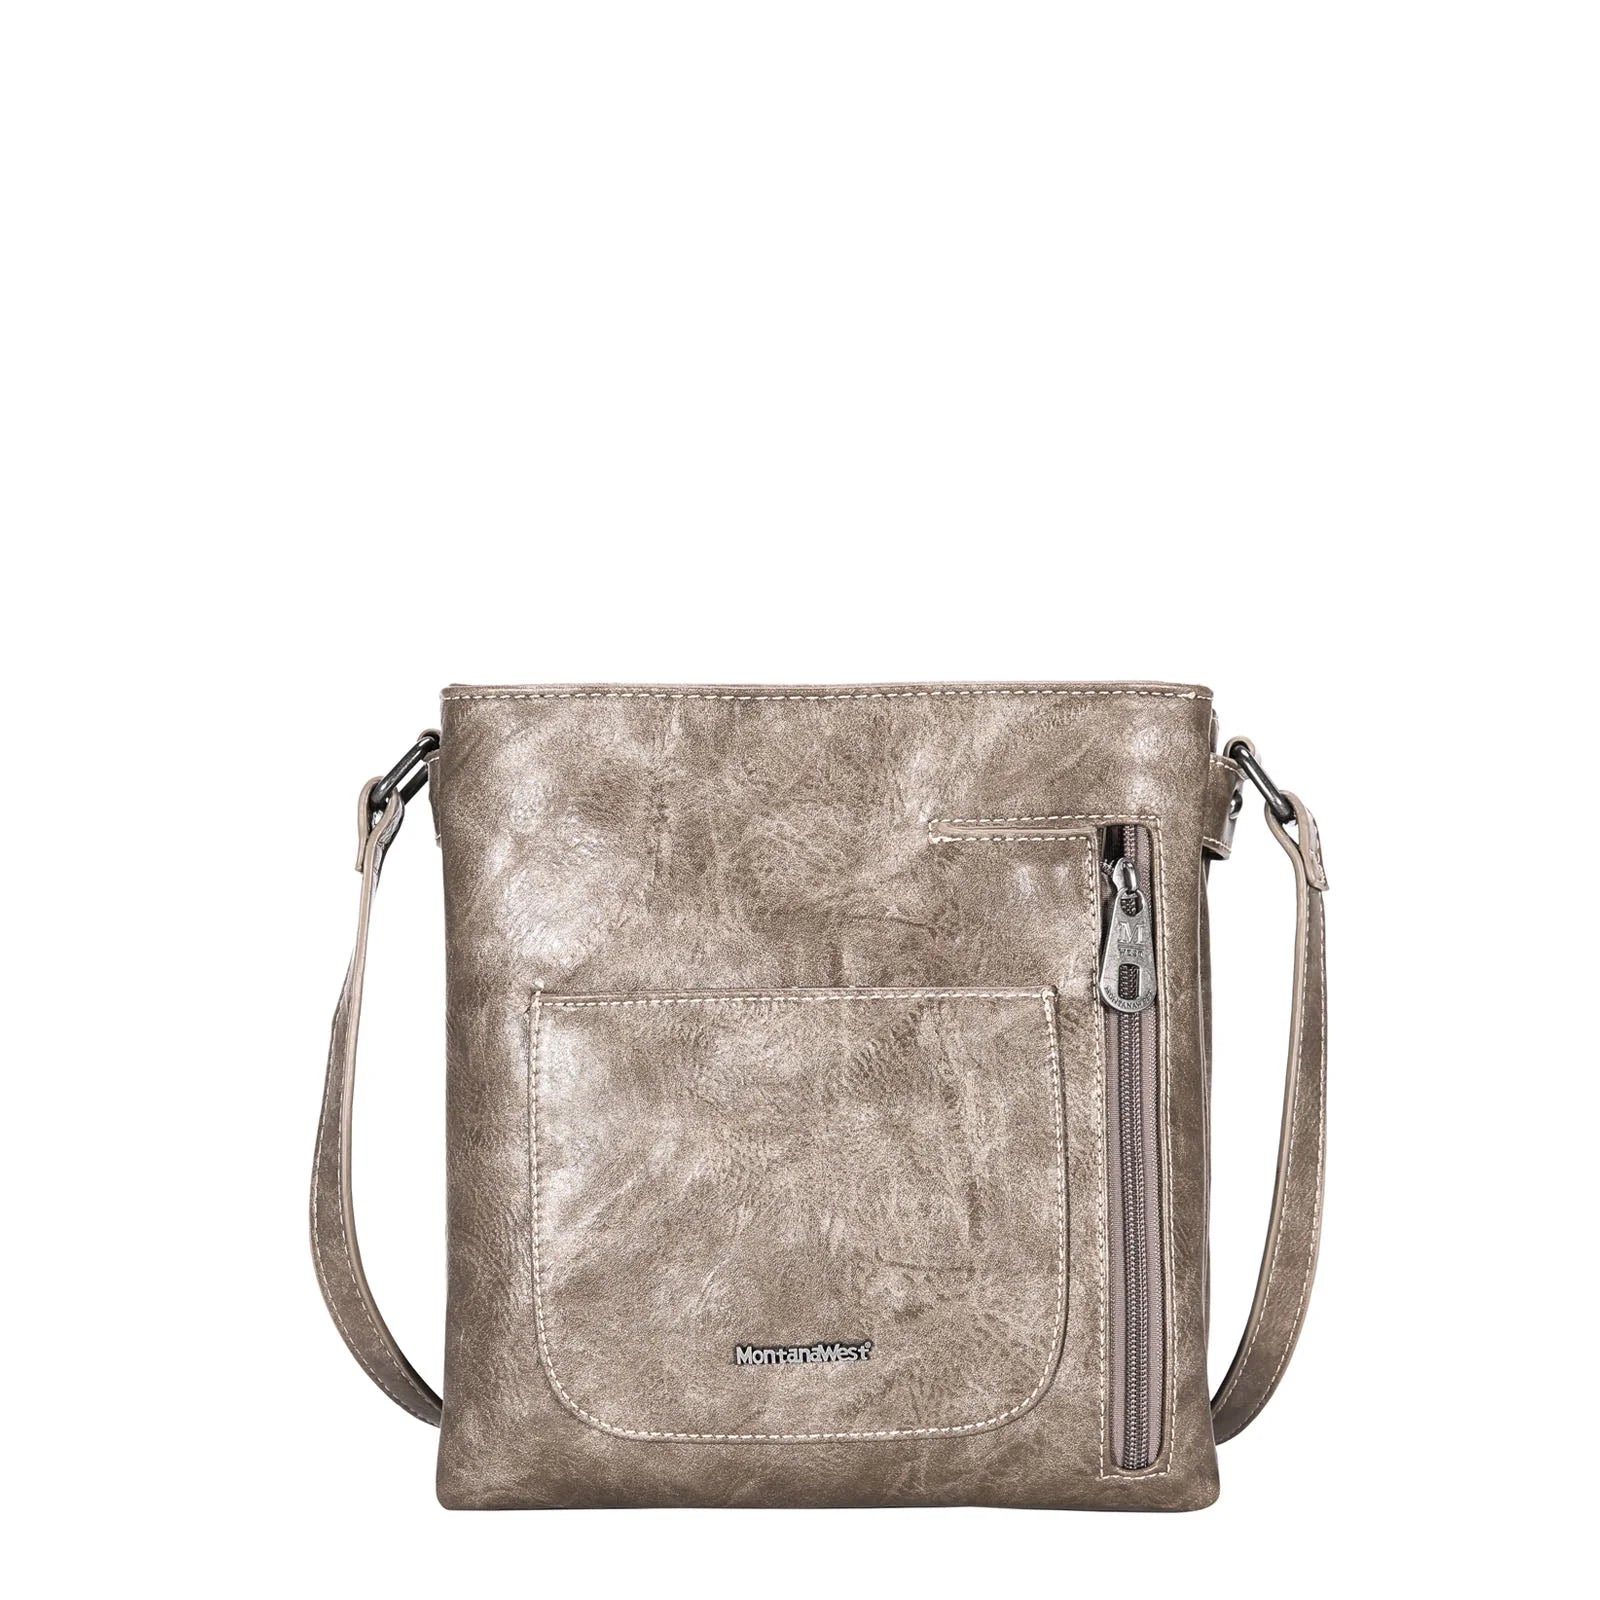 Montana West Buckle Collection Concealed Carry Crossbody Bag